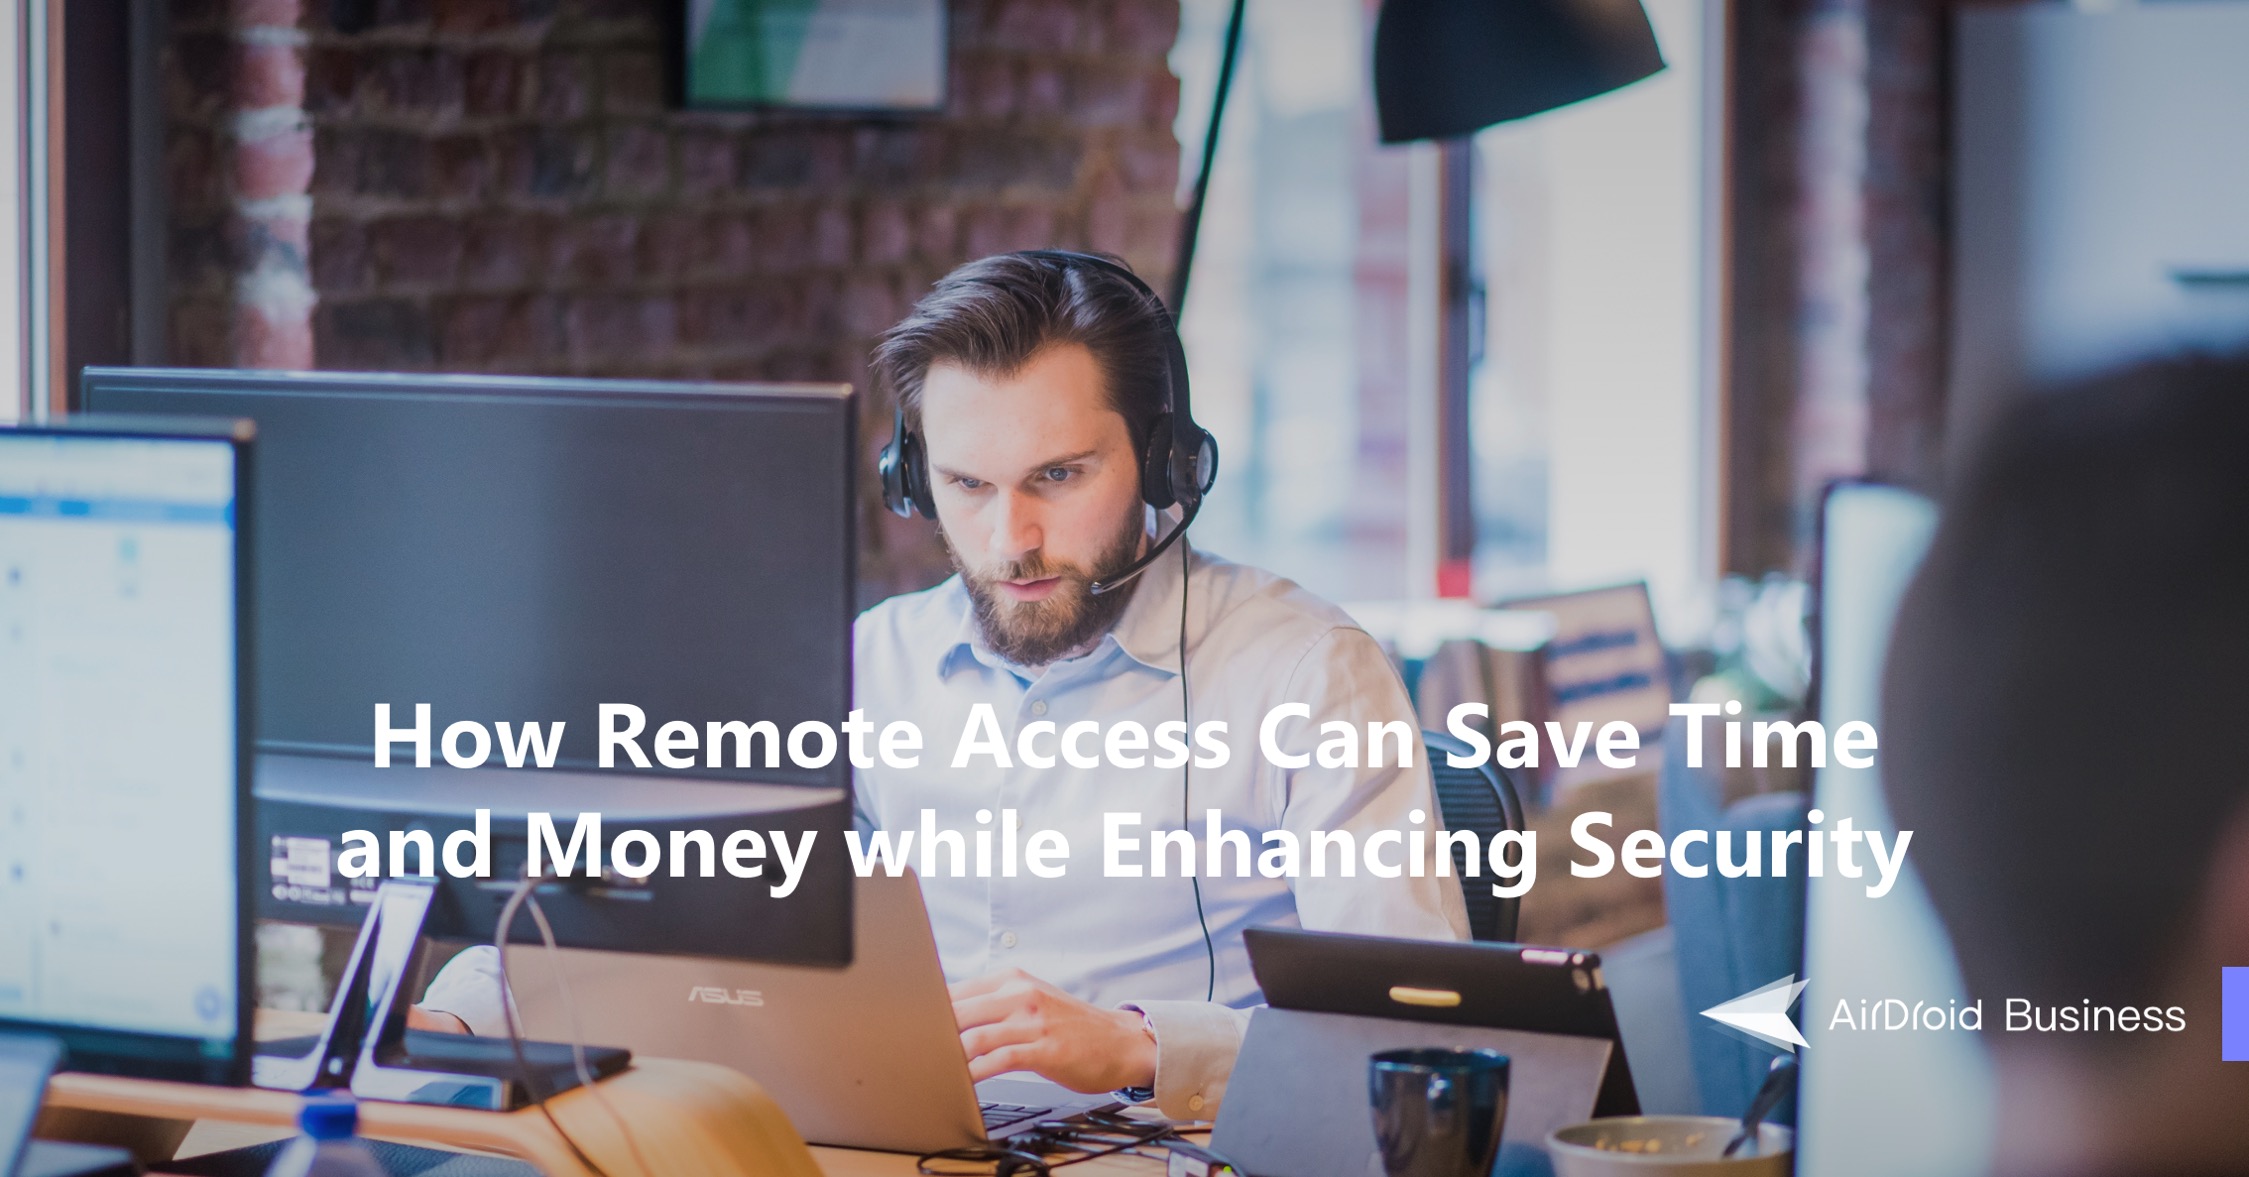 How Remote Access Softwares Can Save Time and Money while Enhancing Security